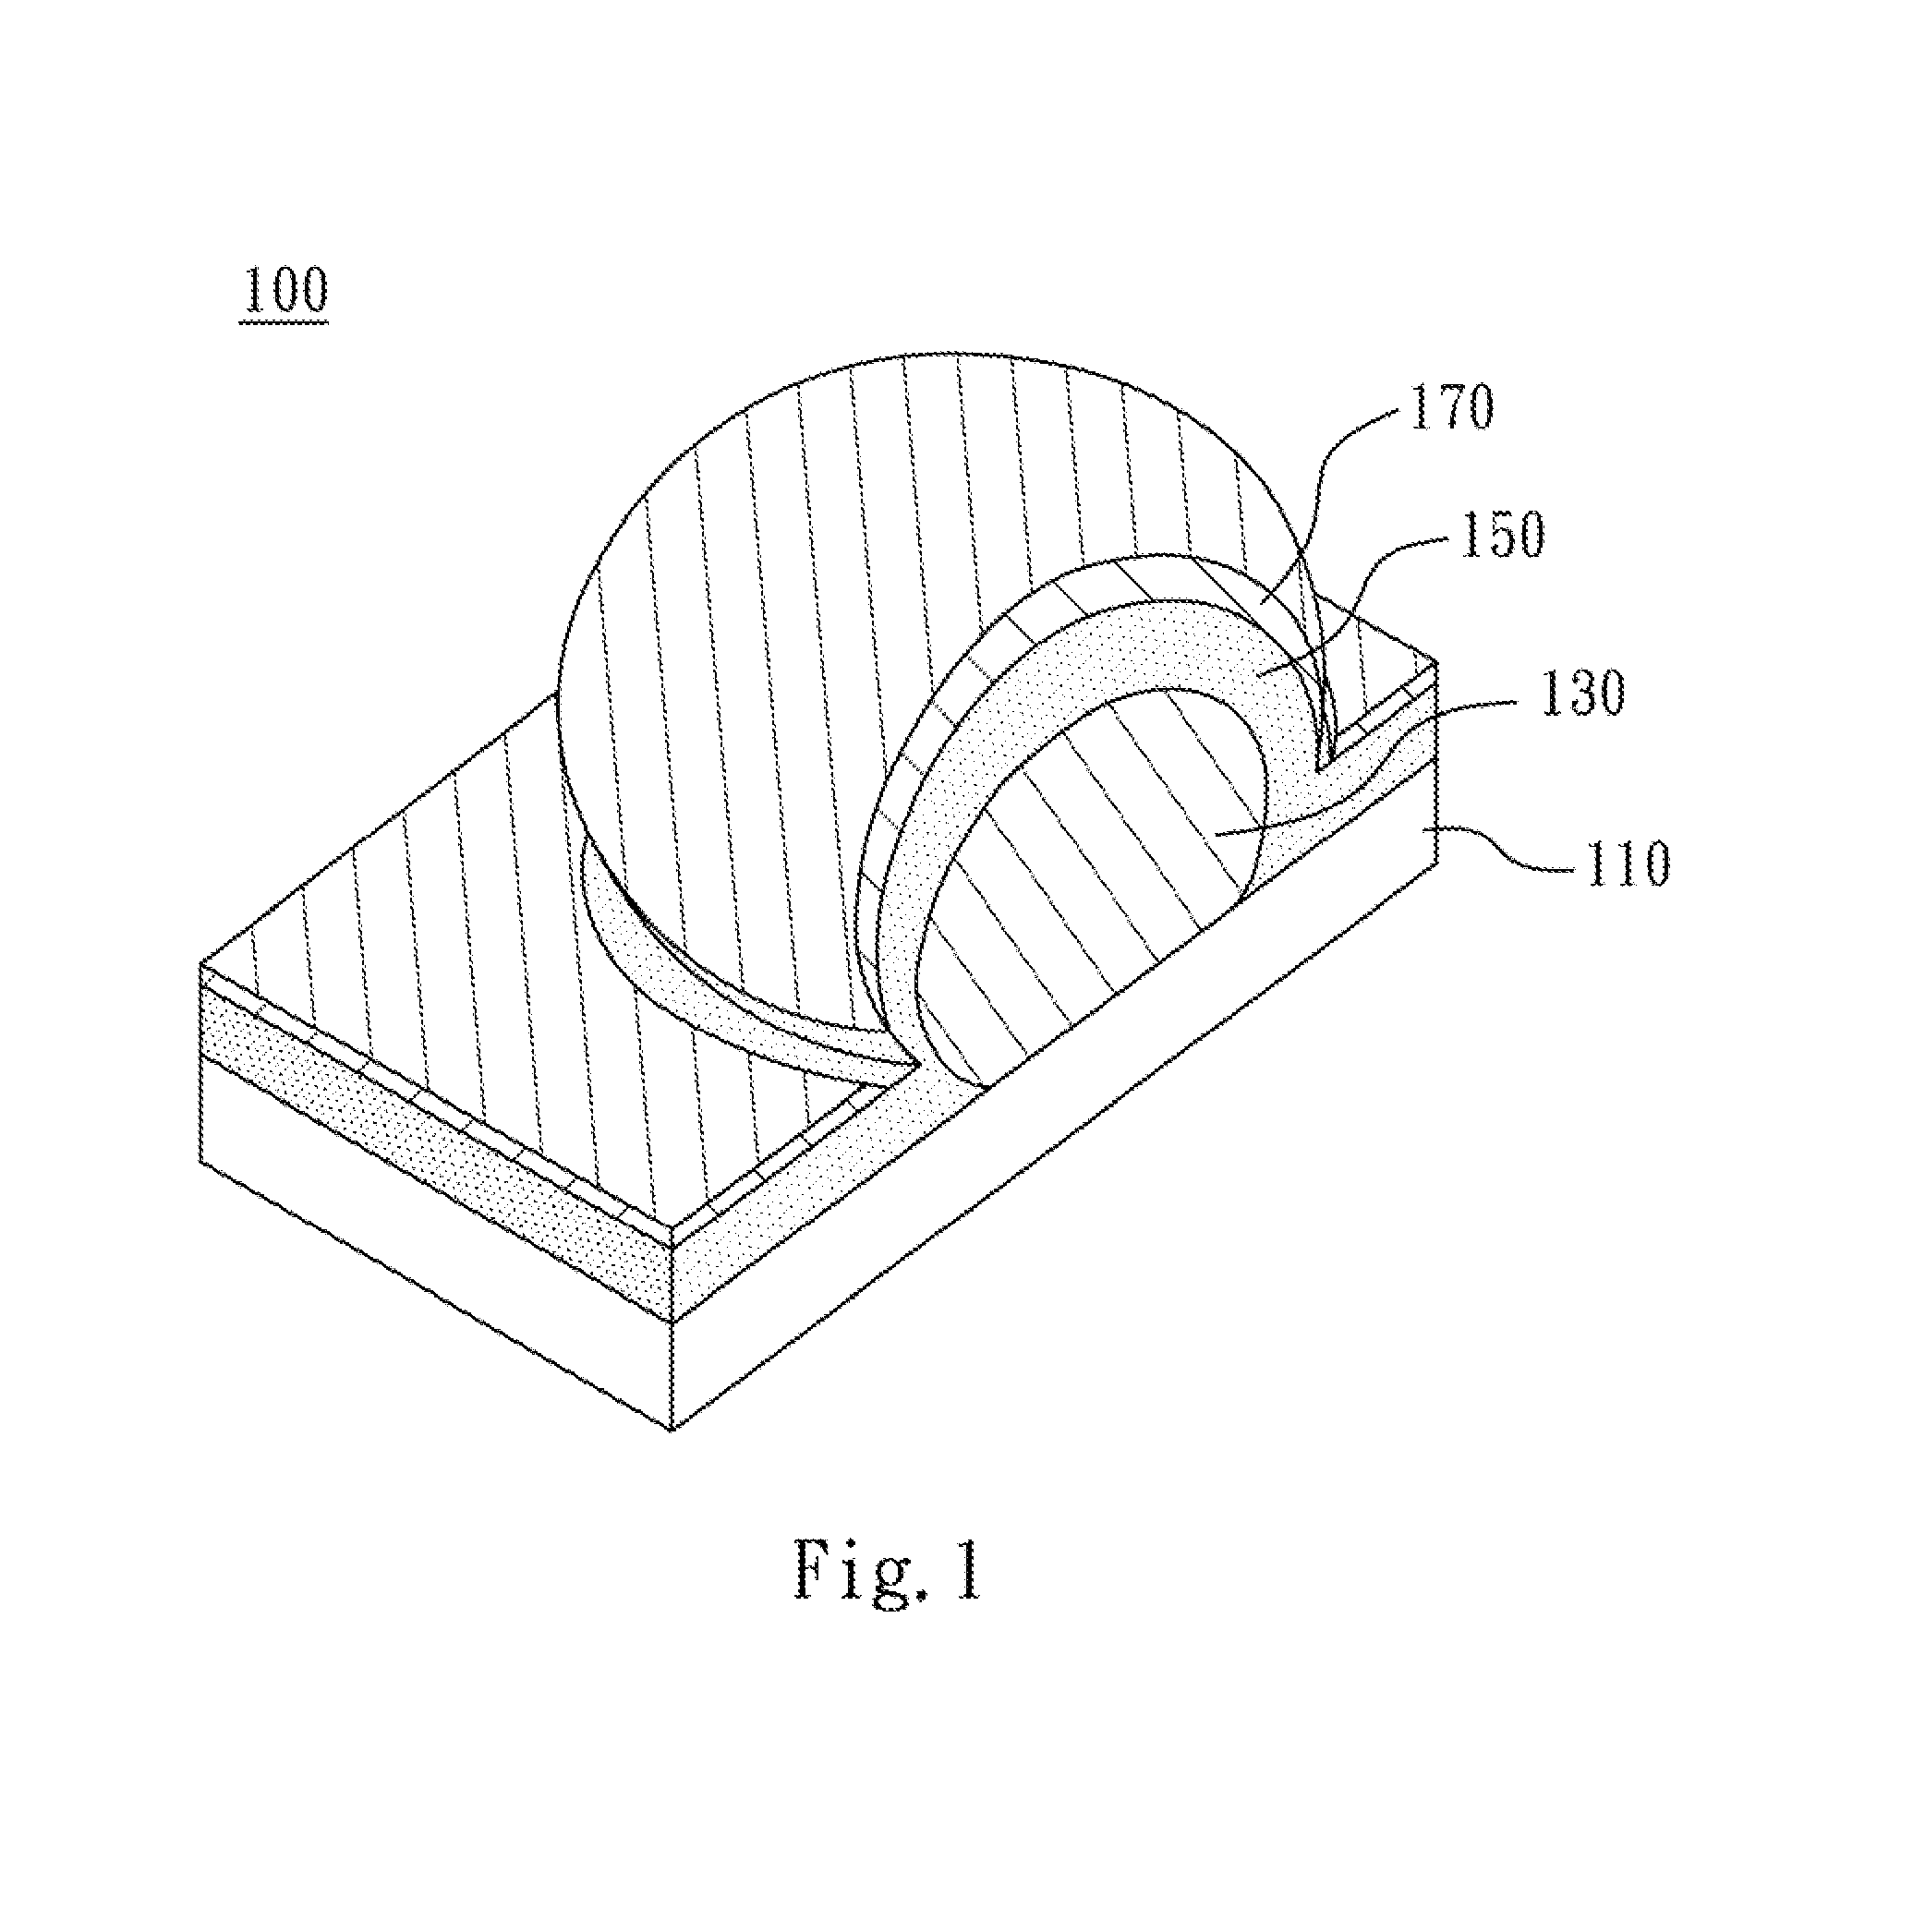 Sers-active structure, fabrication method thereof, and sers system comprising the same